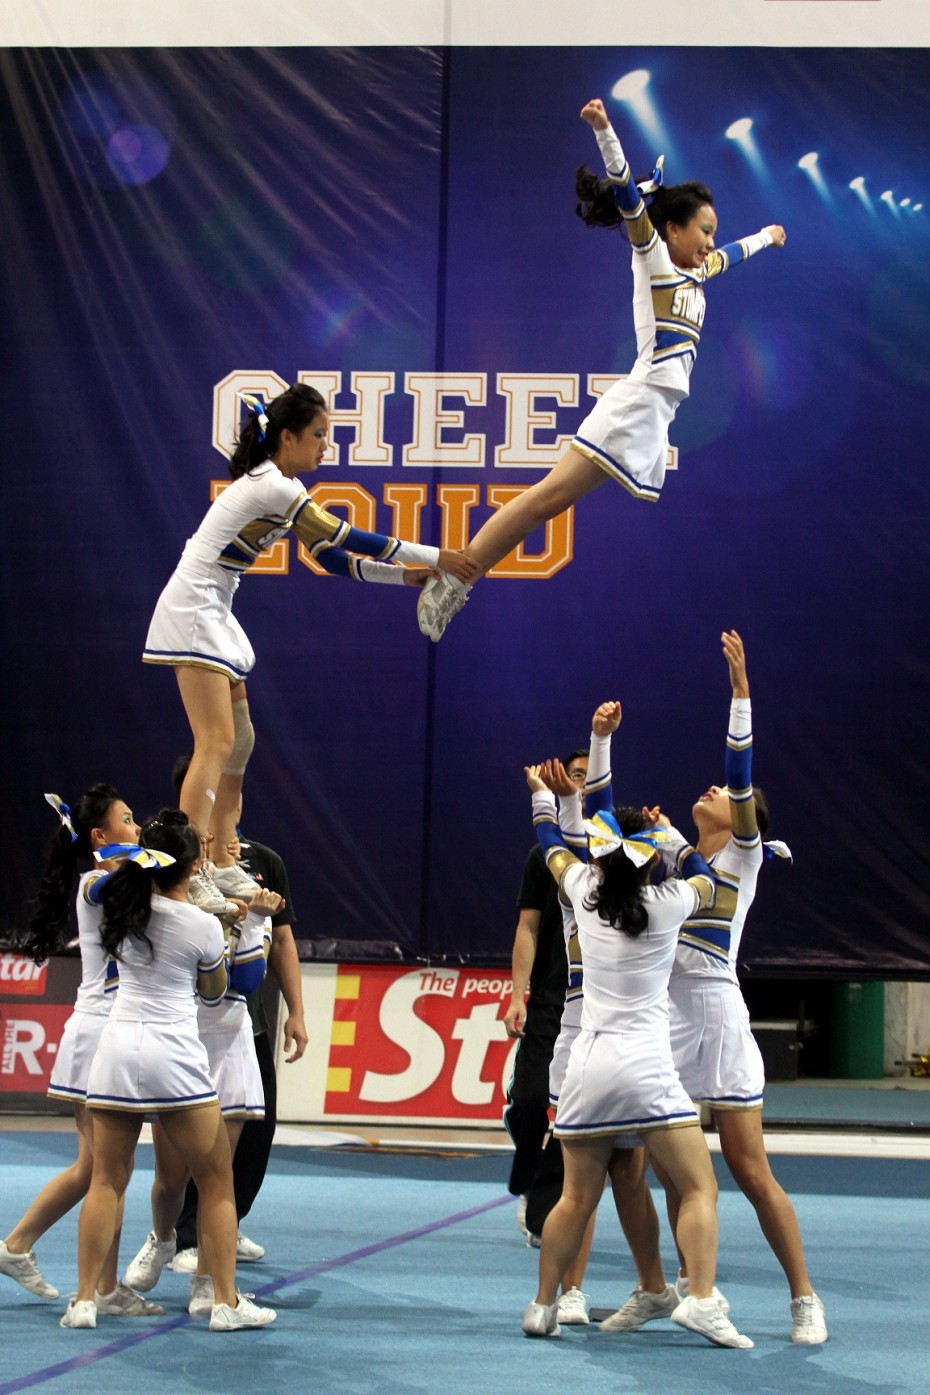 Let's get loud: Here are some photos of all the action at CHEER 2014 to whet your appetite ahead of this year's competition. Get ready for even more cheerleading action, heart-stopping stunts, silly games with celebrity hosts and, of course, school spirit!